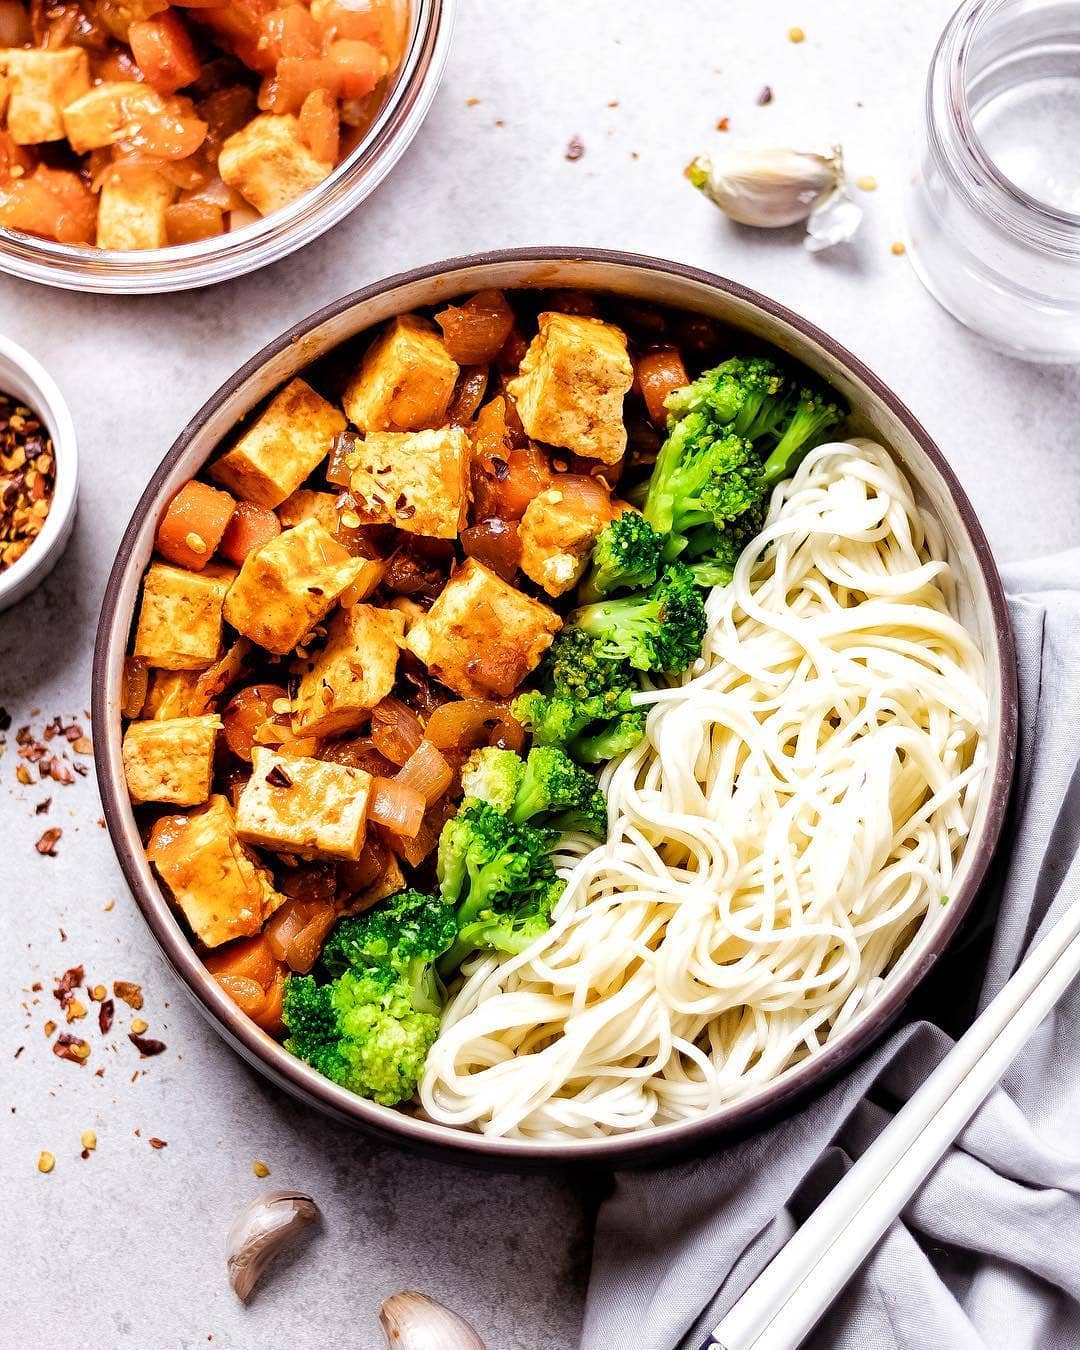 Sweet & Spicy Tofu with Broccoli and Noodles